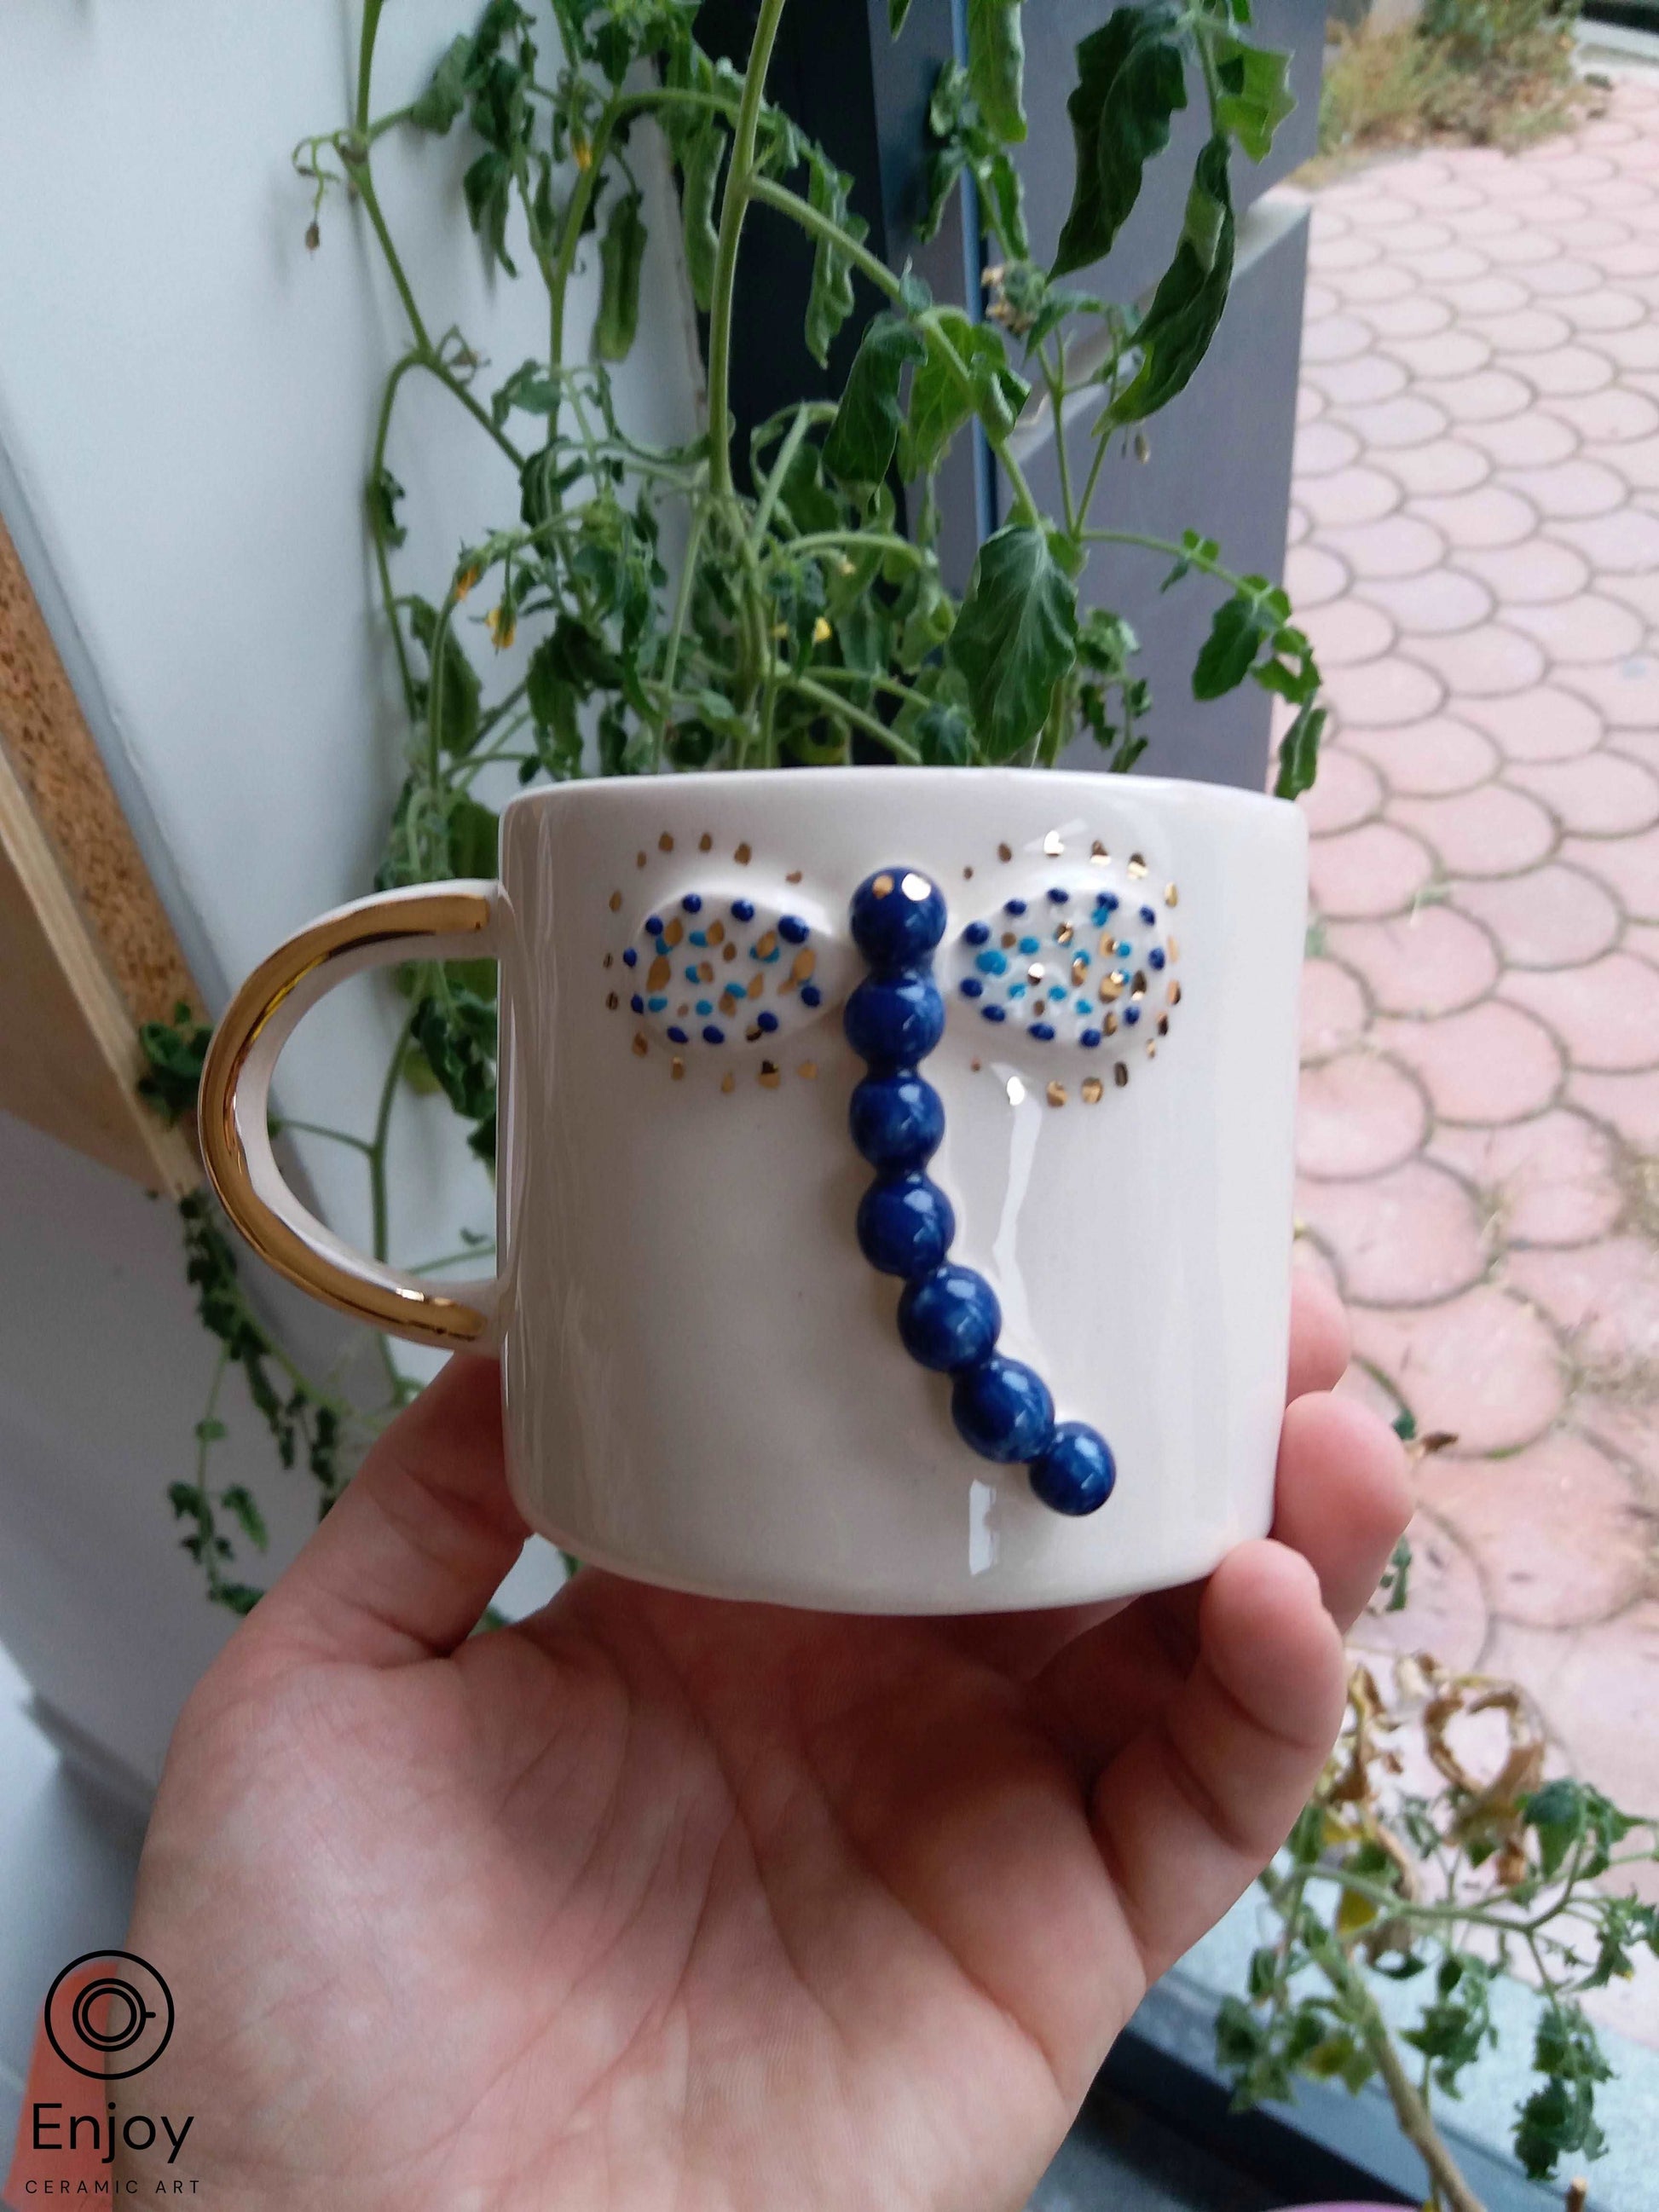 A hand presents a 'Blue Dragonfly Handmade Ceramic Coffee Mug' with a gold handle, set against a natural backdrop of green tomato plants and a tiled patio.